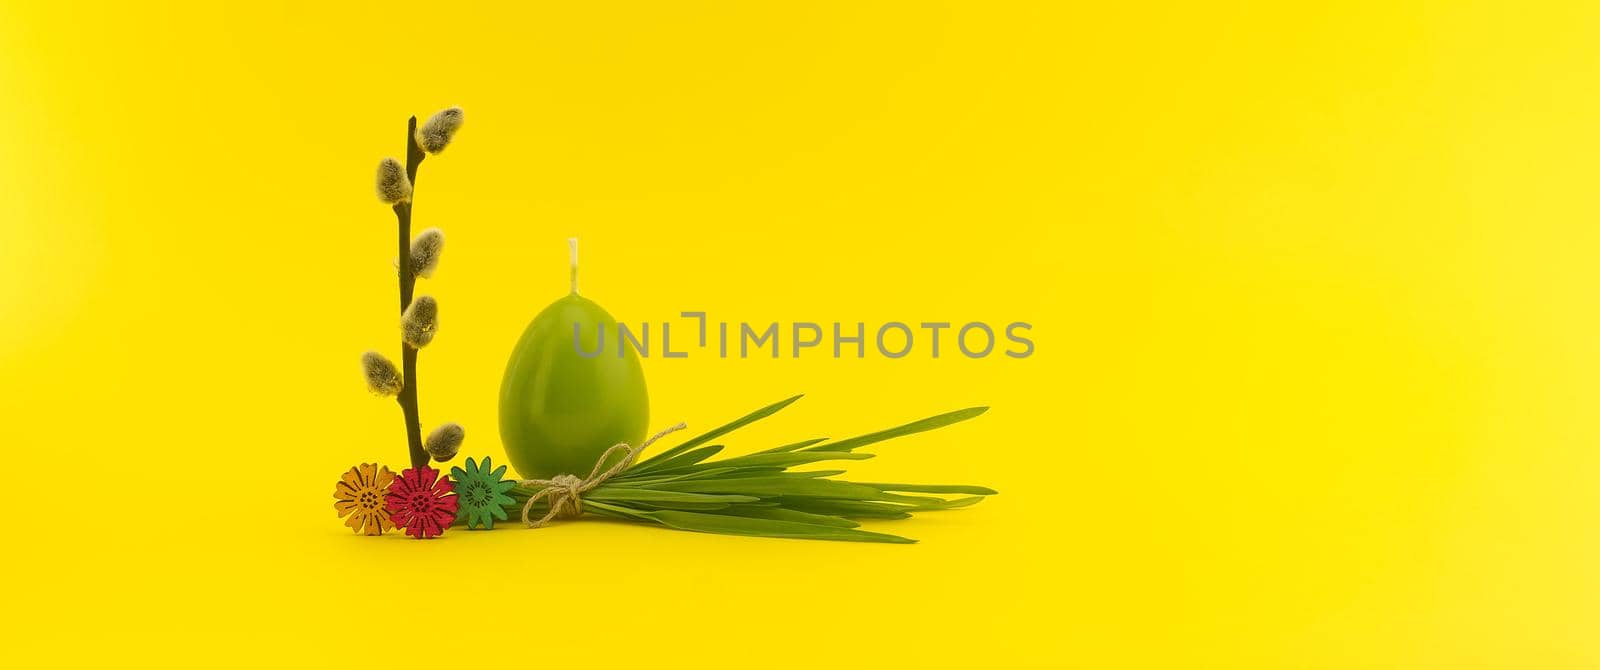 Minimalistic Easter banner with wheat seedlings by NetPix